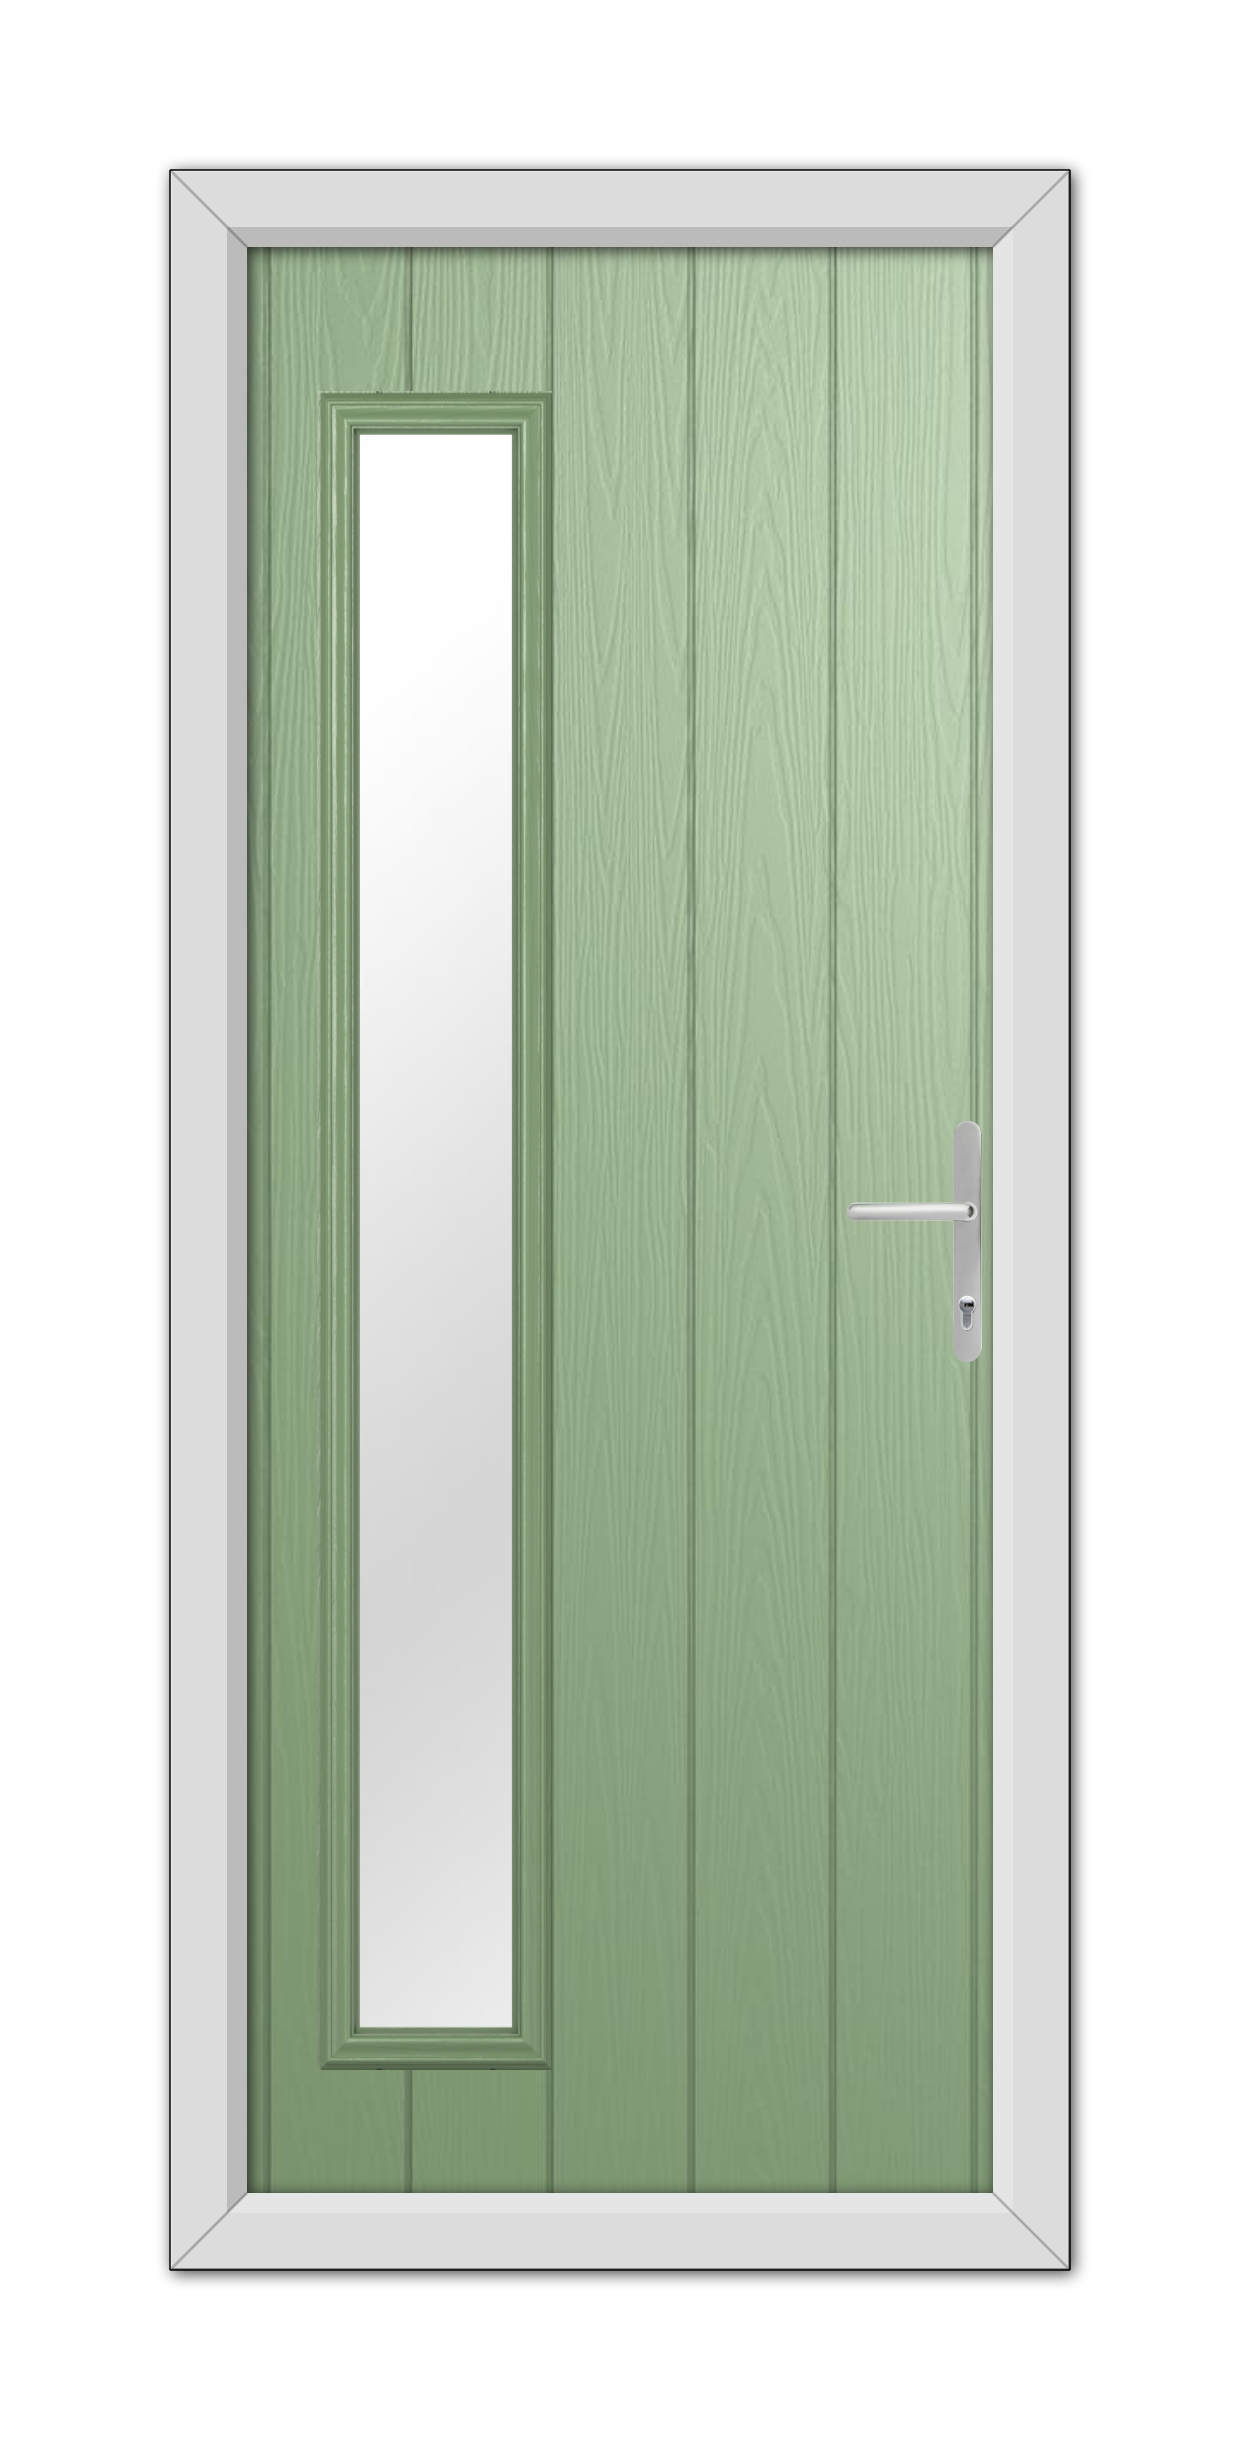 A Chartwell Green Sutherland Composite Door with a vertical rectangular window on the left and a metal handle on the right, framed within a white door frame.